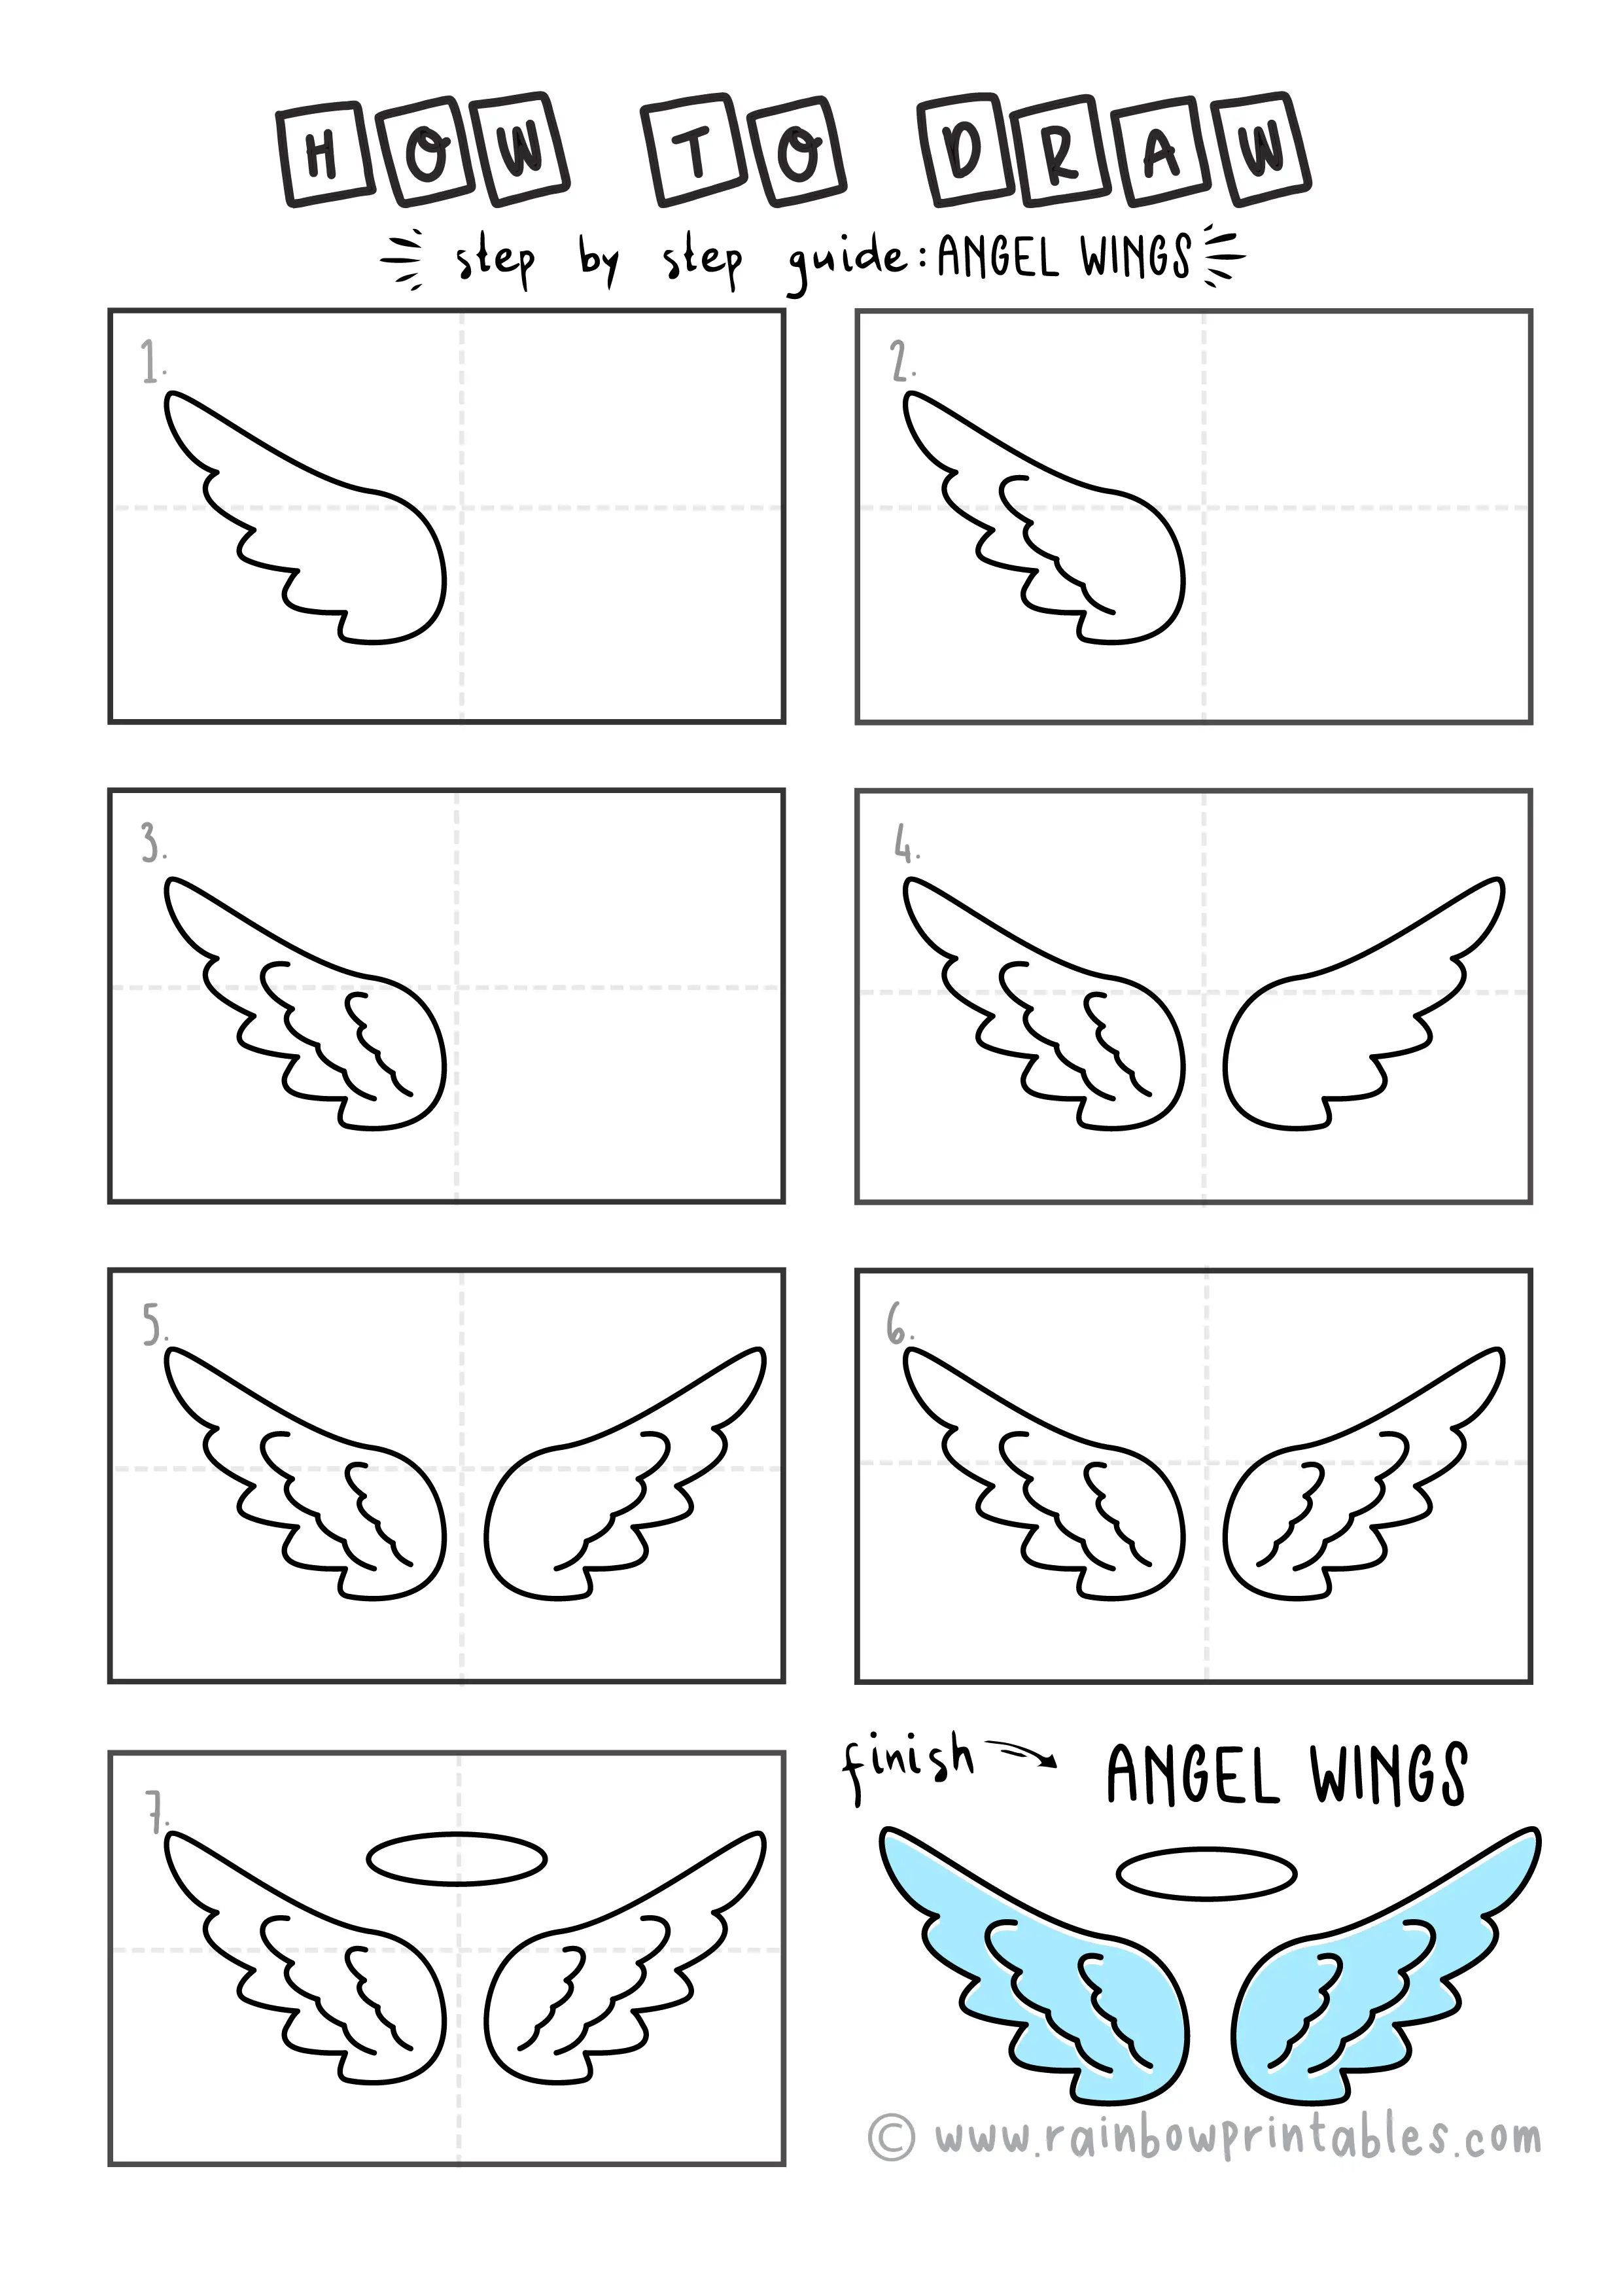 How To Draw a ANGEL WINGS Step by Step for Beginners and Kids | Easy and Simple